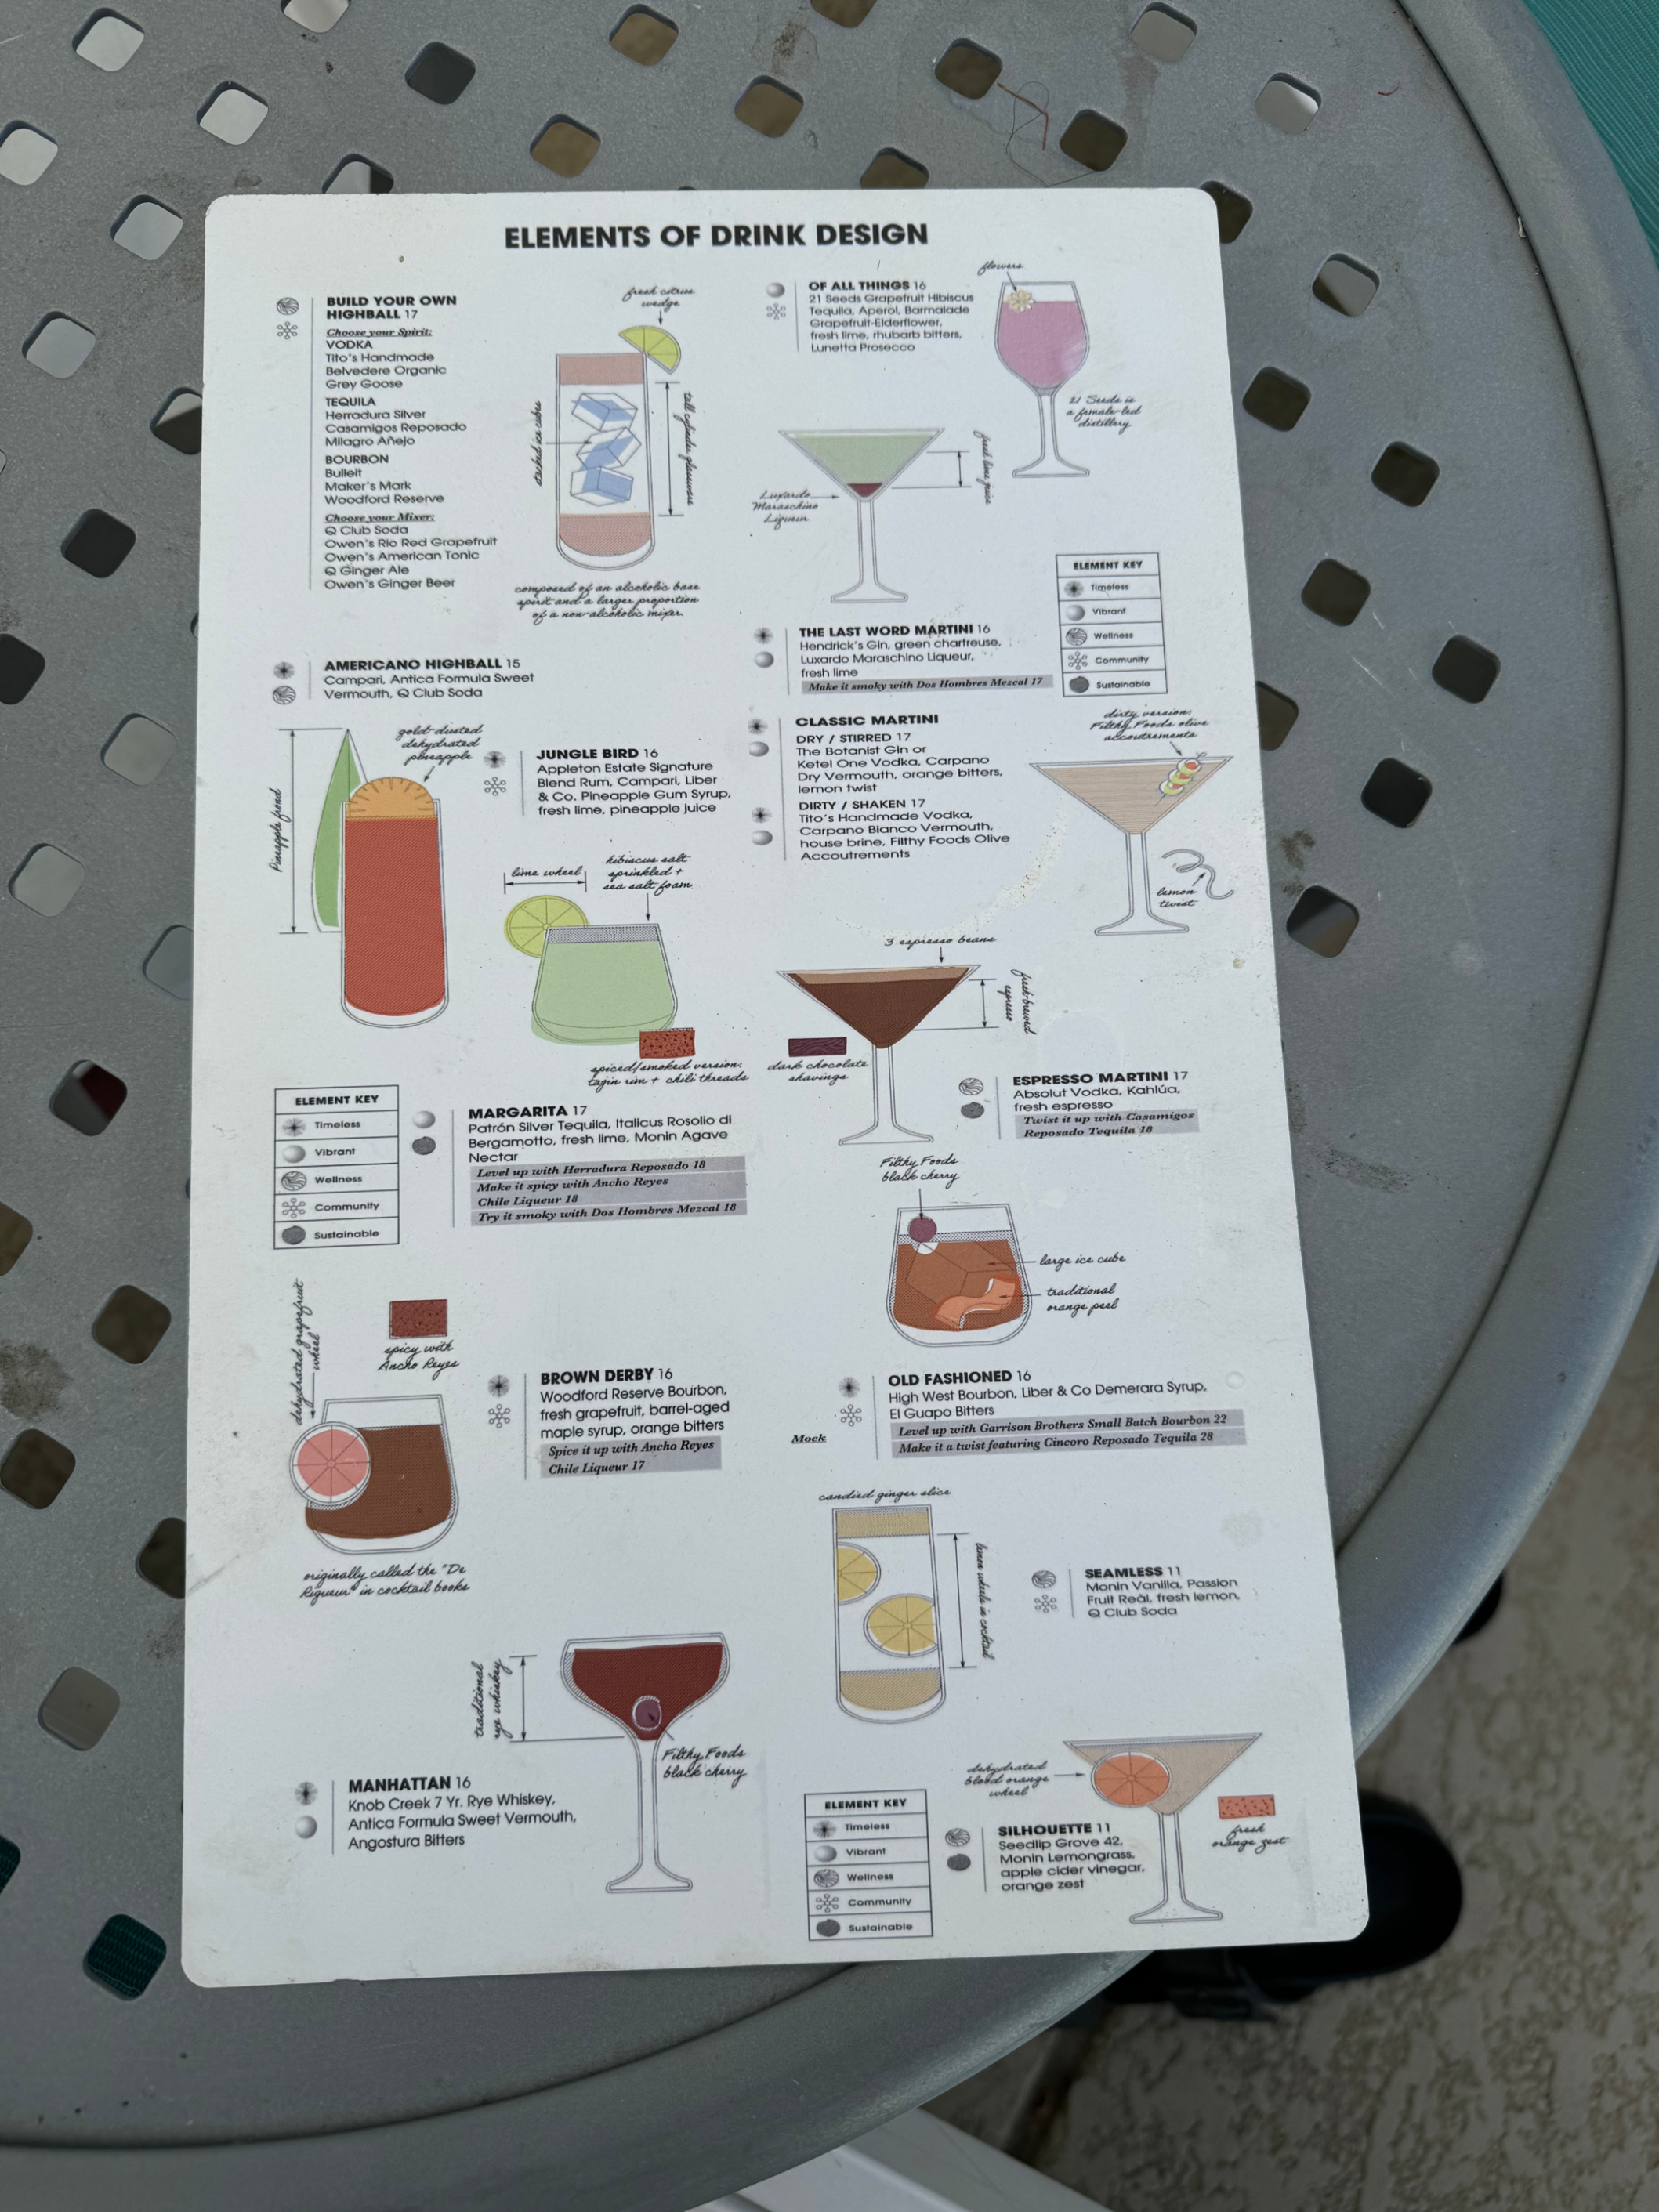 A drink design chart with names and illustrations of various cocktails